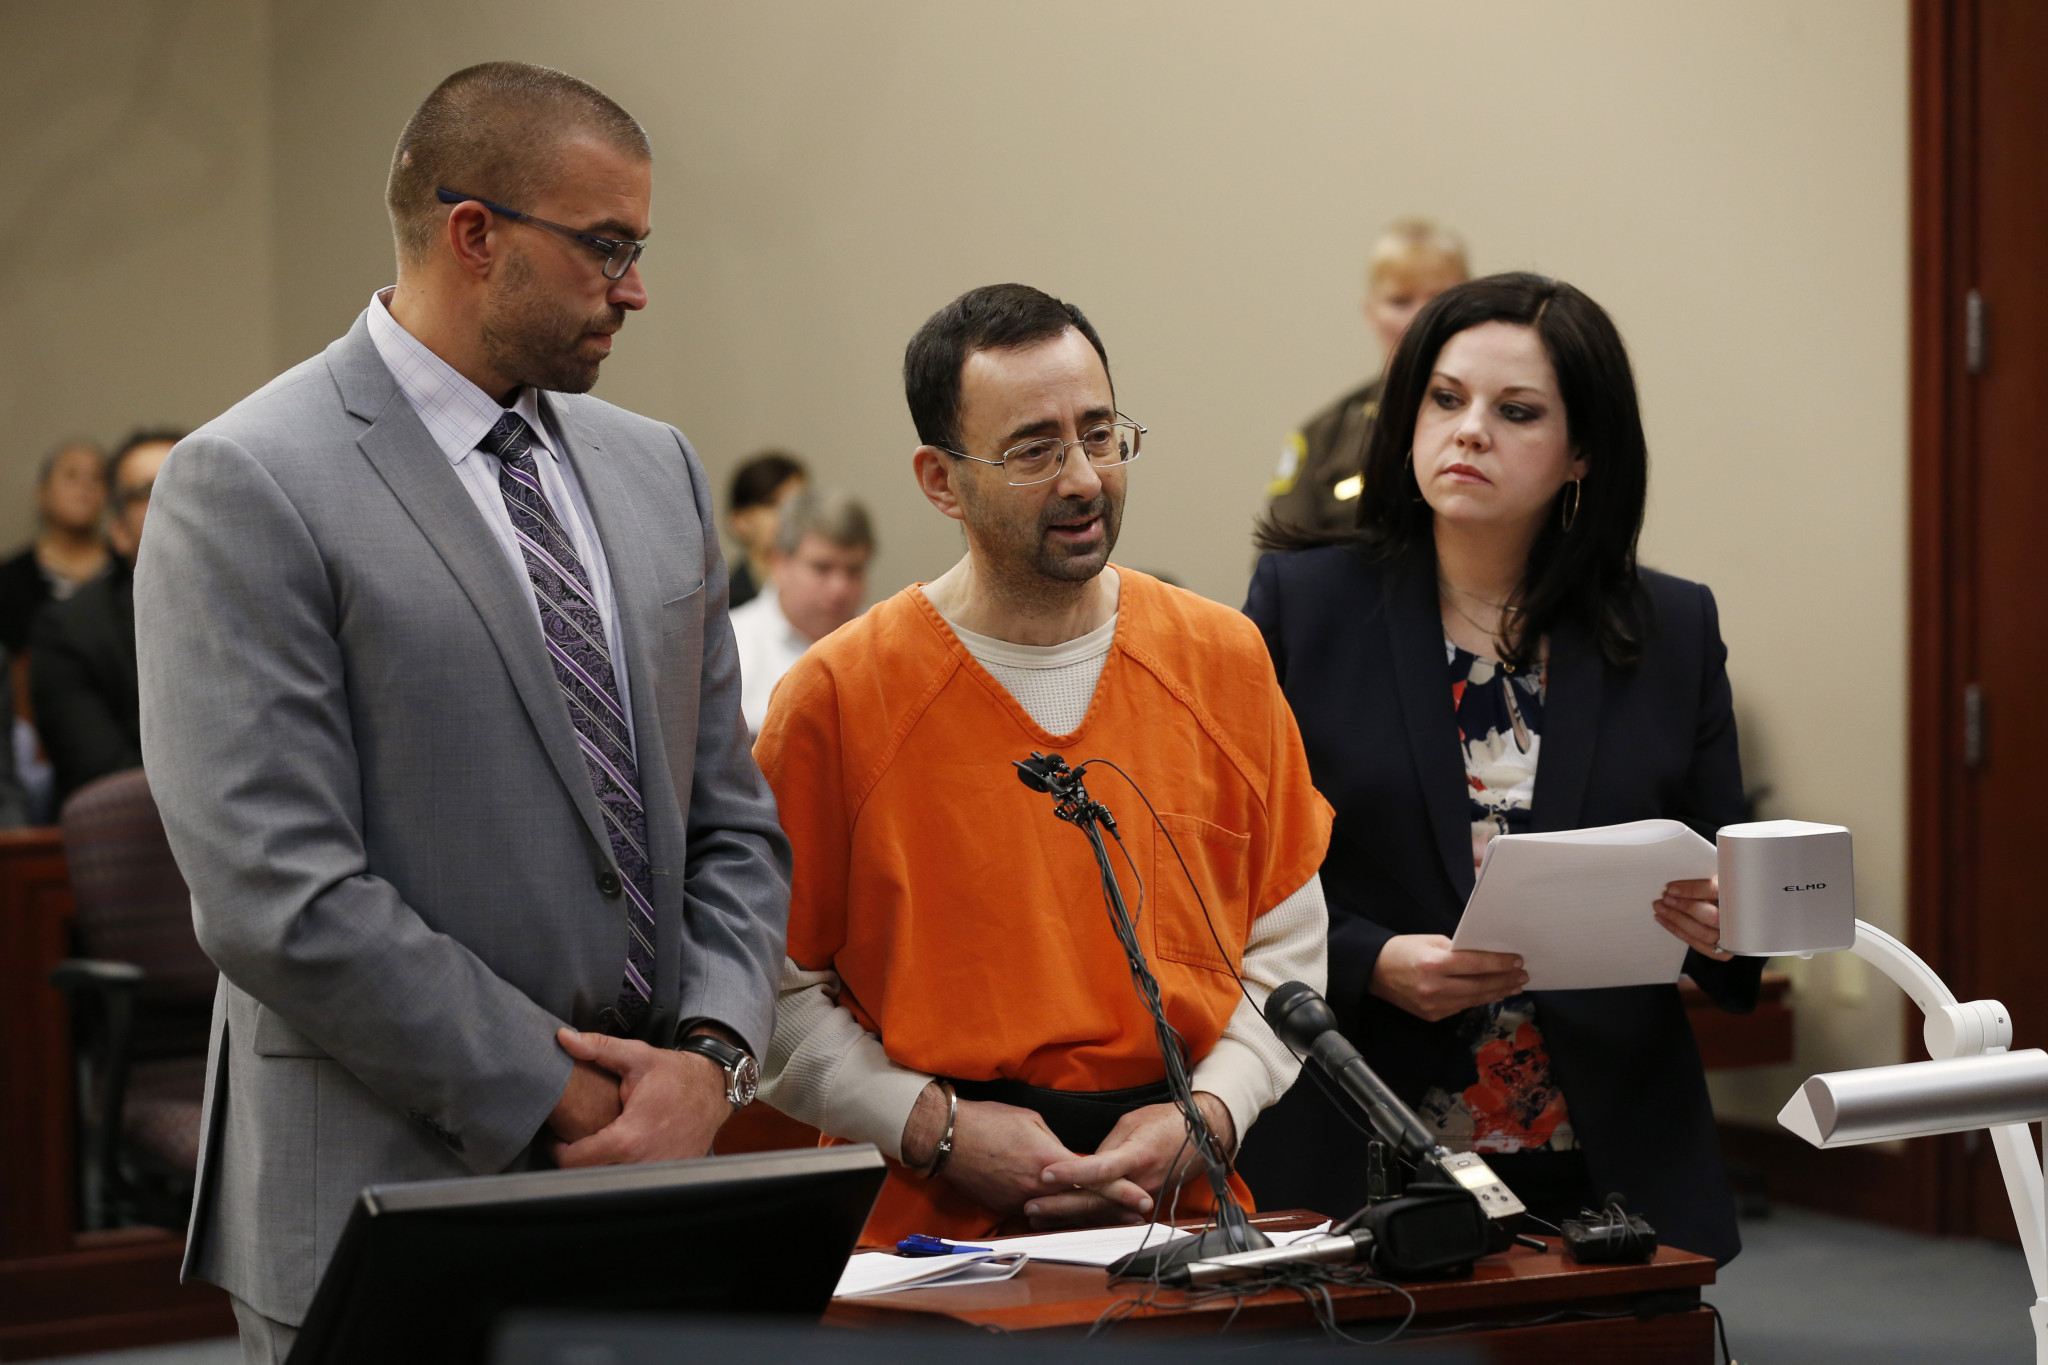 The scandal surrounding Larry Nassar has created growing pressure for change at USA Gymnastics ©USA Gymnastics